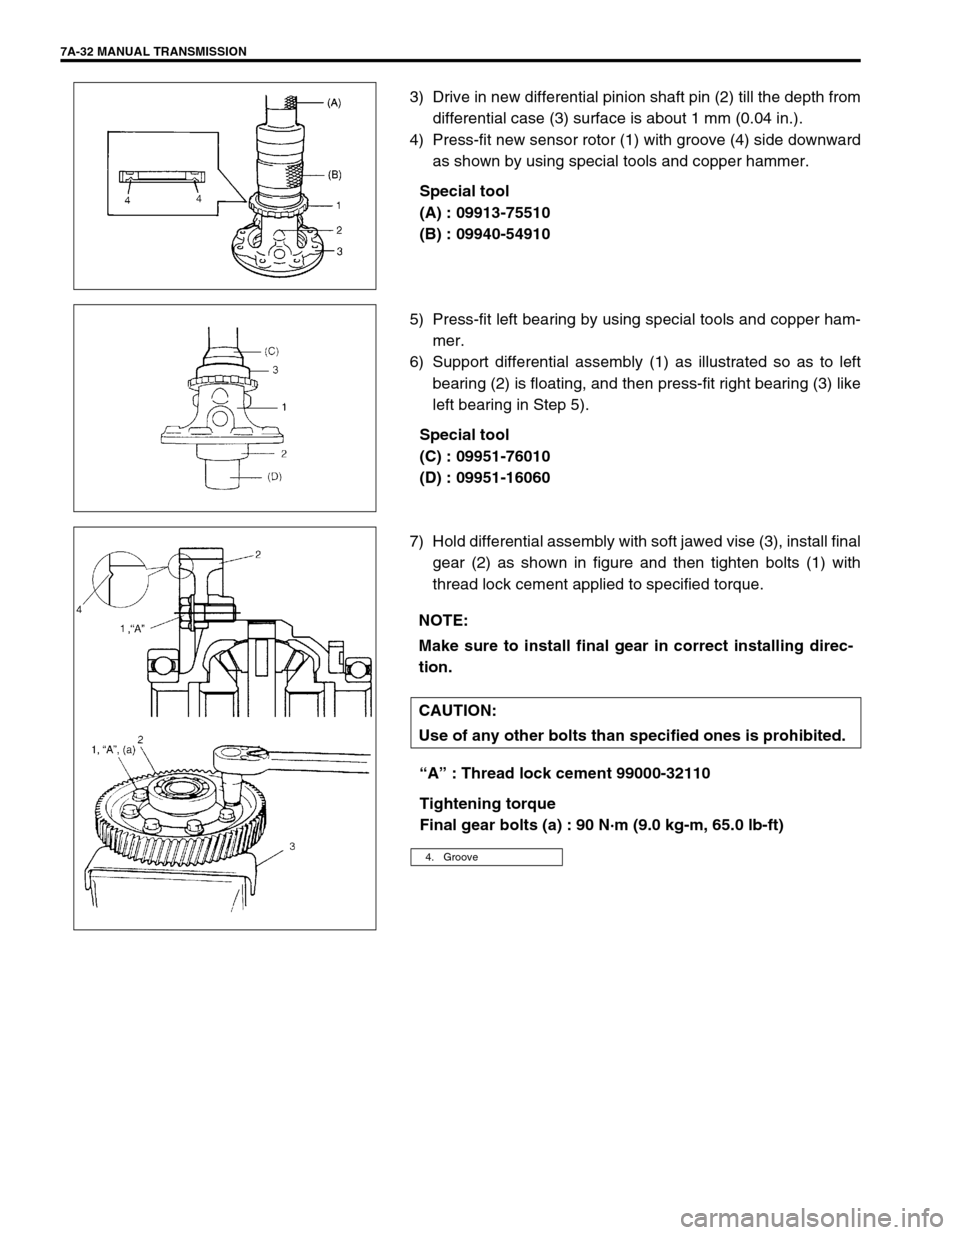 SUZUKI SWIFT 2000 1.G Transmission Service Workshop Manual 7A-32 MANUAL TRANSMISSION
3) Drive in new differential pinion shaft pin (2) till the depth from
differential case (3) surface is about 1 mm (0.04 in.).
4) Press-fit new sensor rotor (1) with groove (4